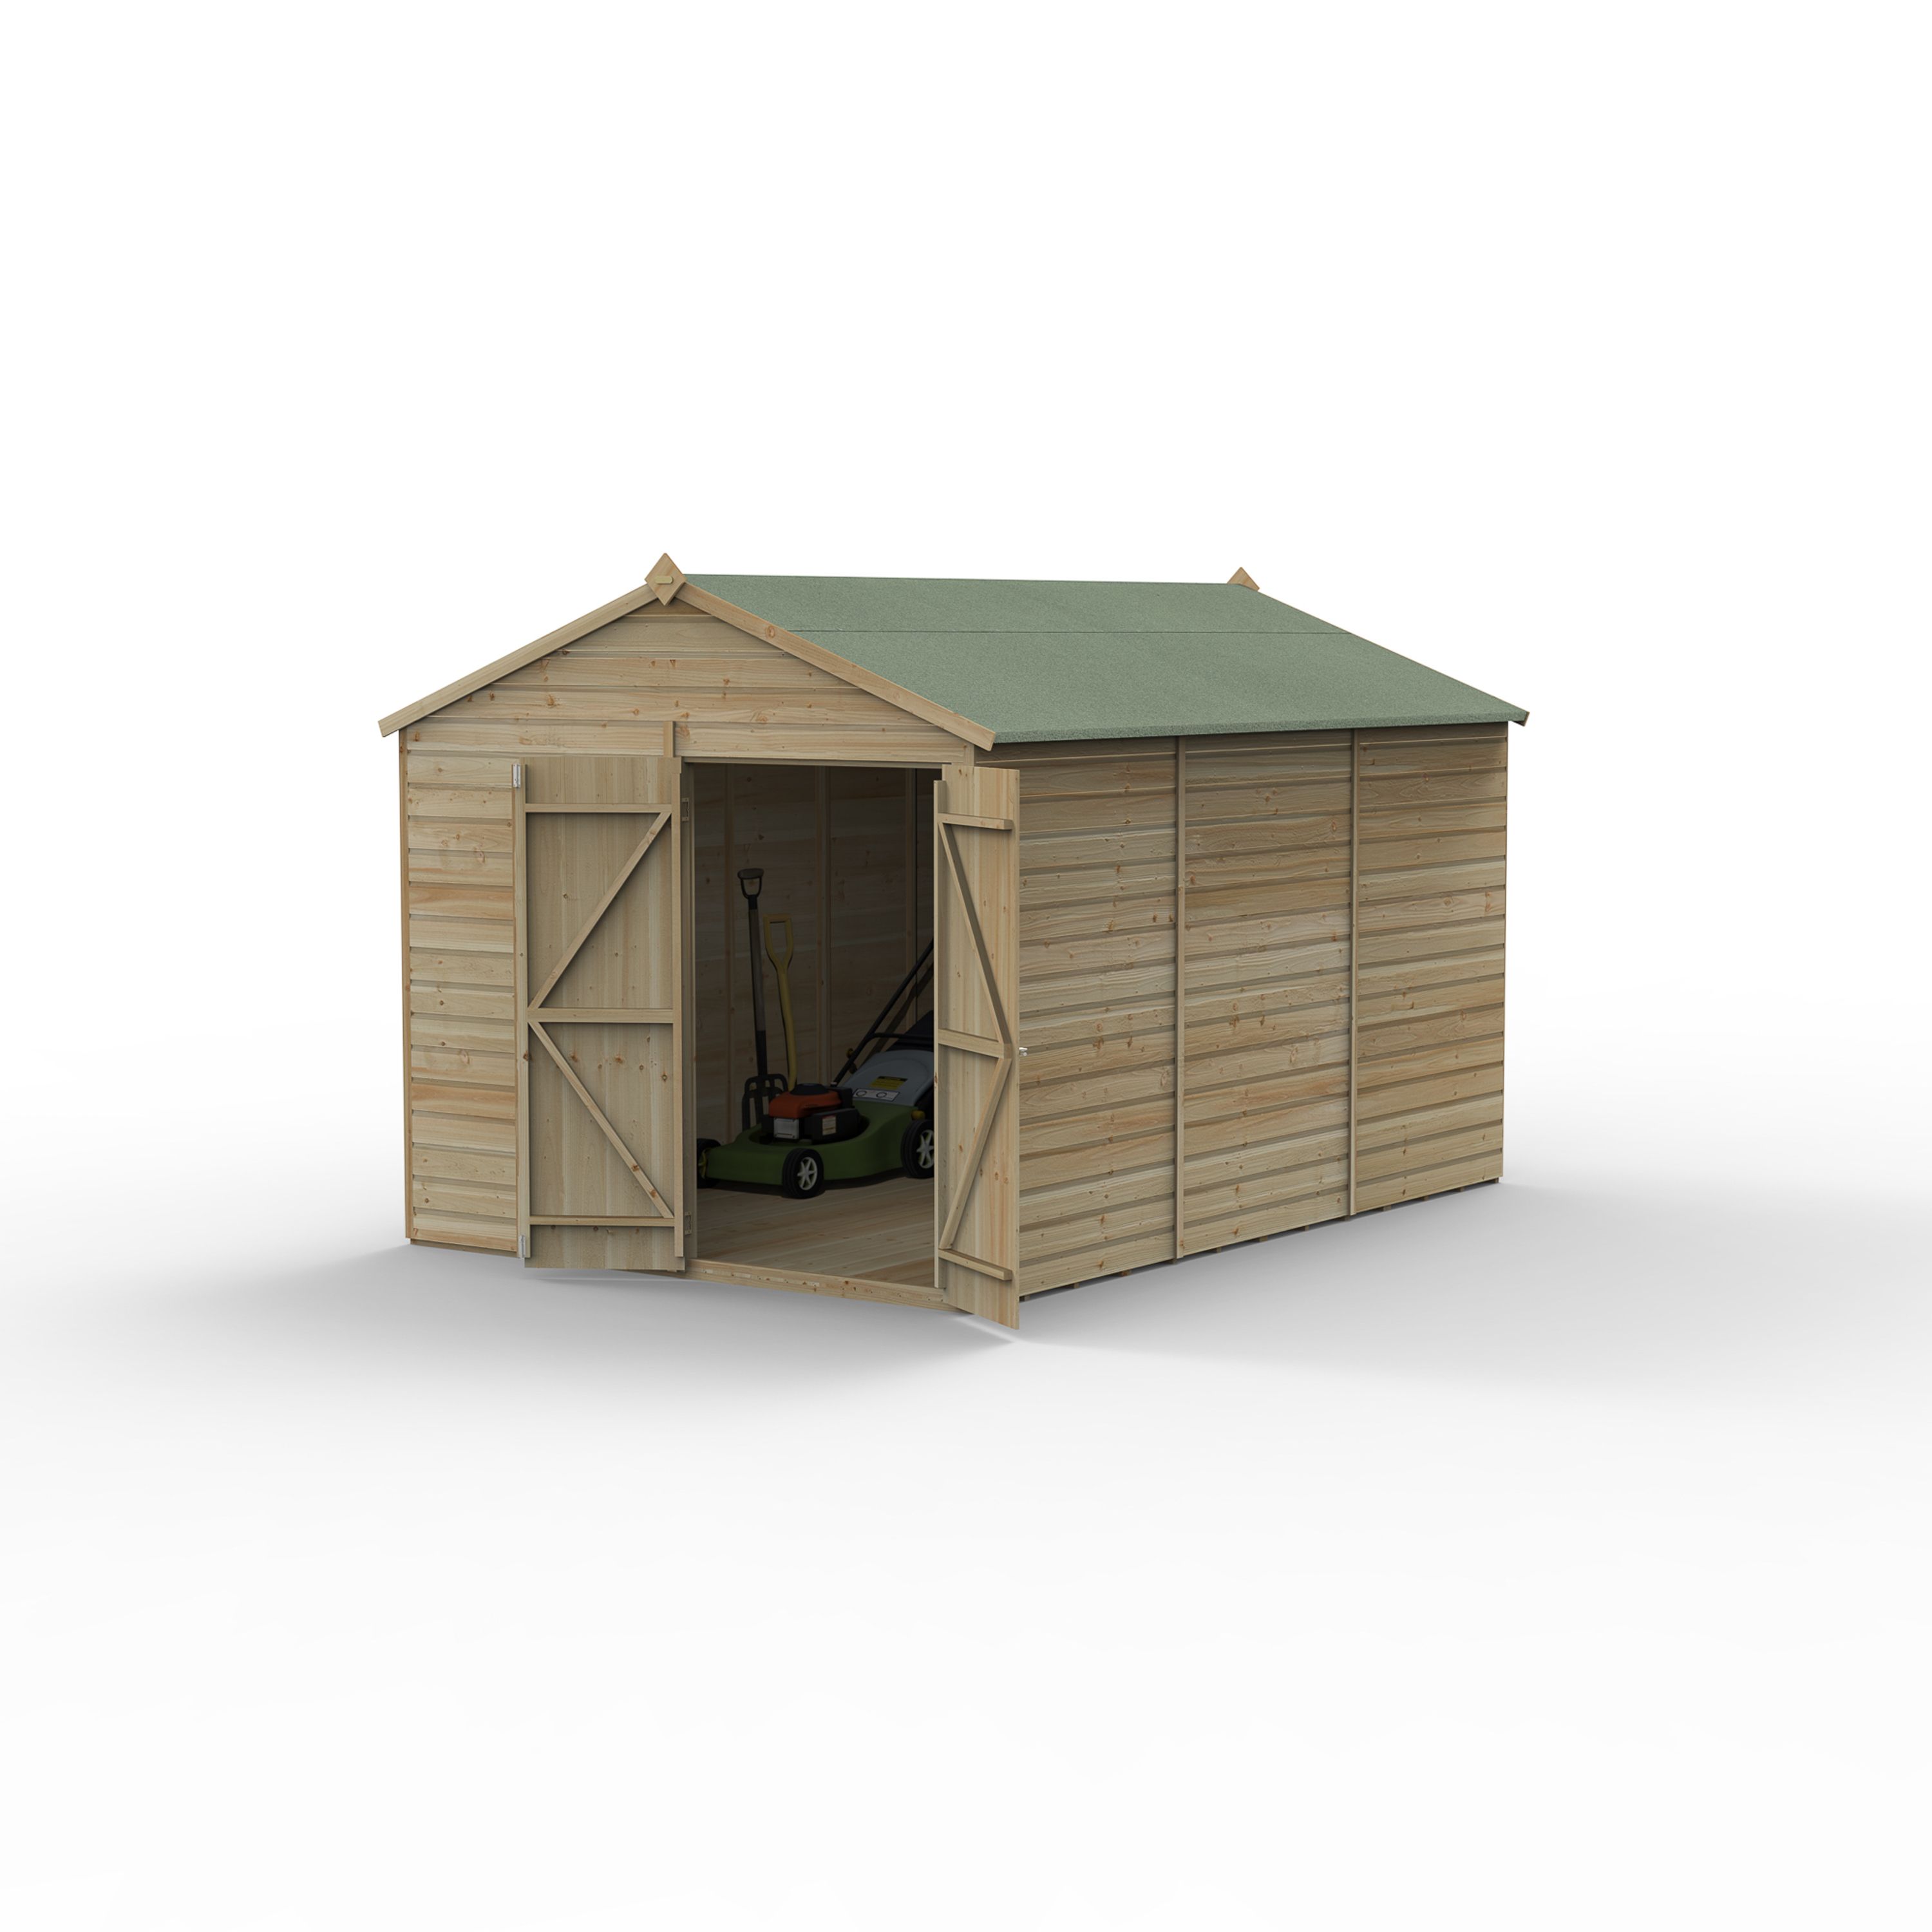 Forest Garden Beckwood 12x8 ft Apex Natural timber Wooden 2 door Shed with floor - Assembly not required